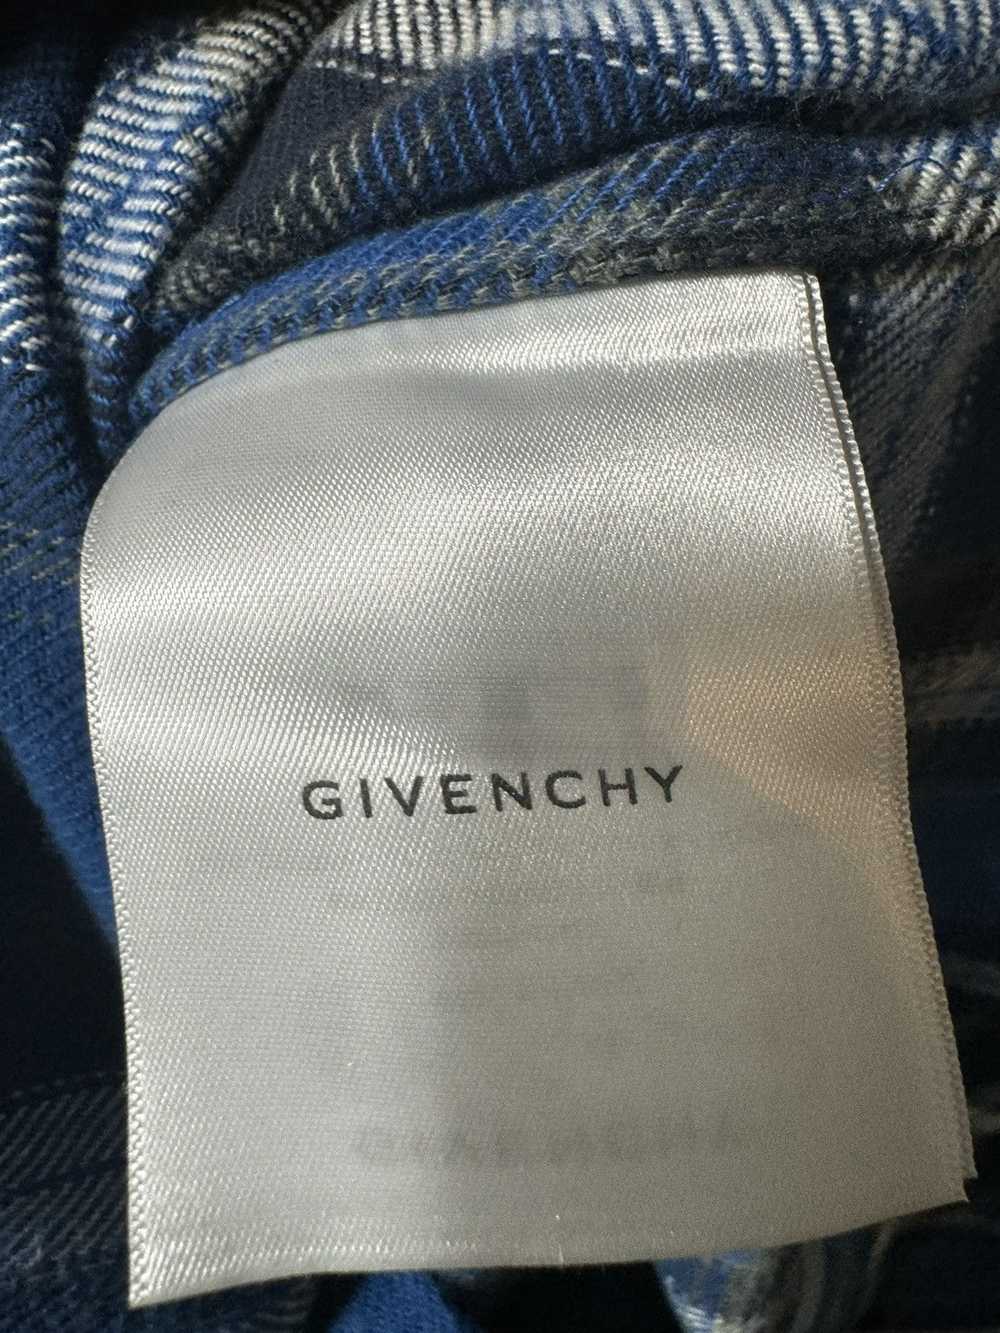 Givenchy GIVENCHY Plaid Flannel Blue - image 4